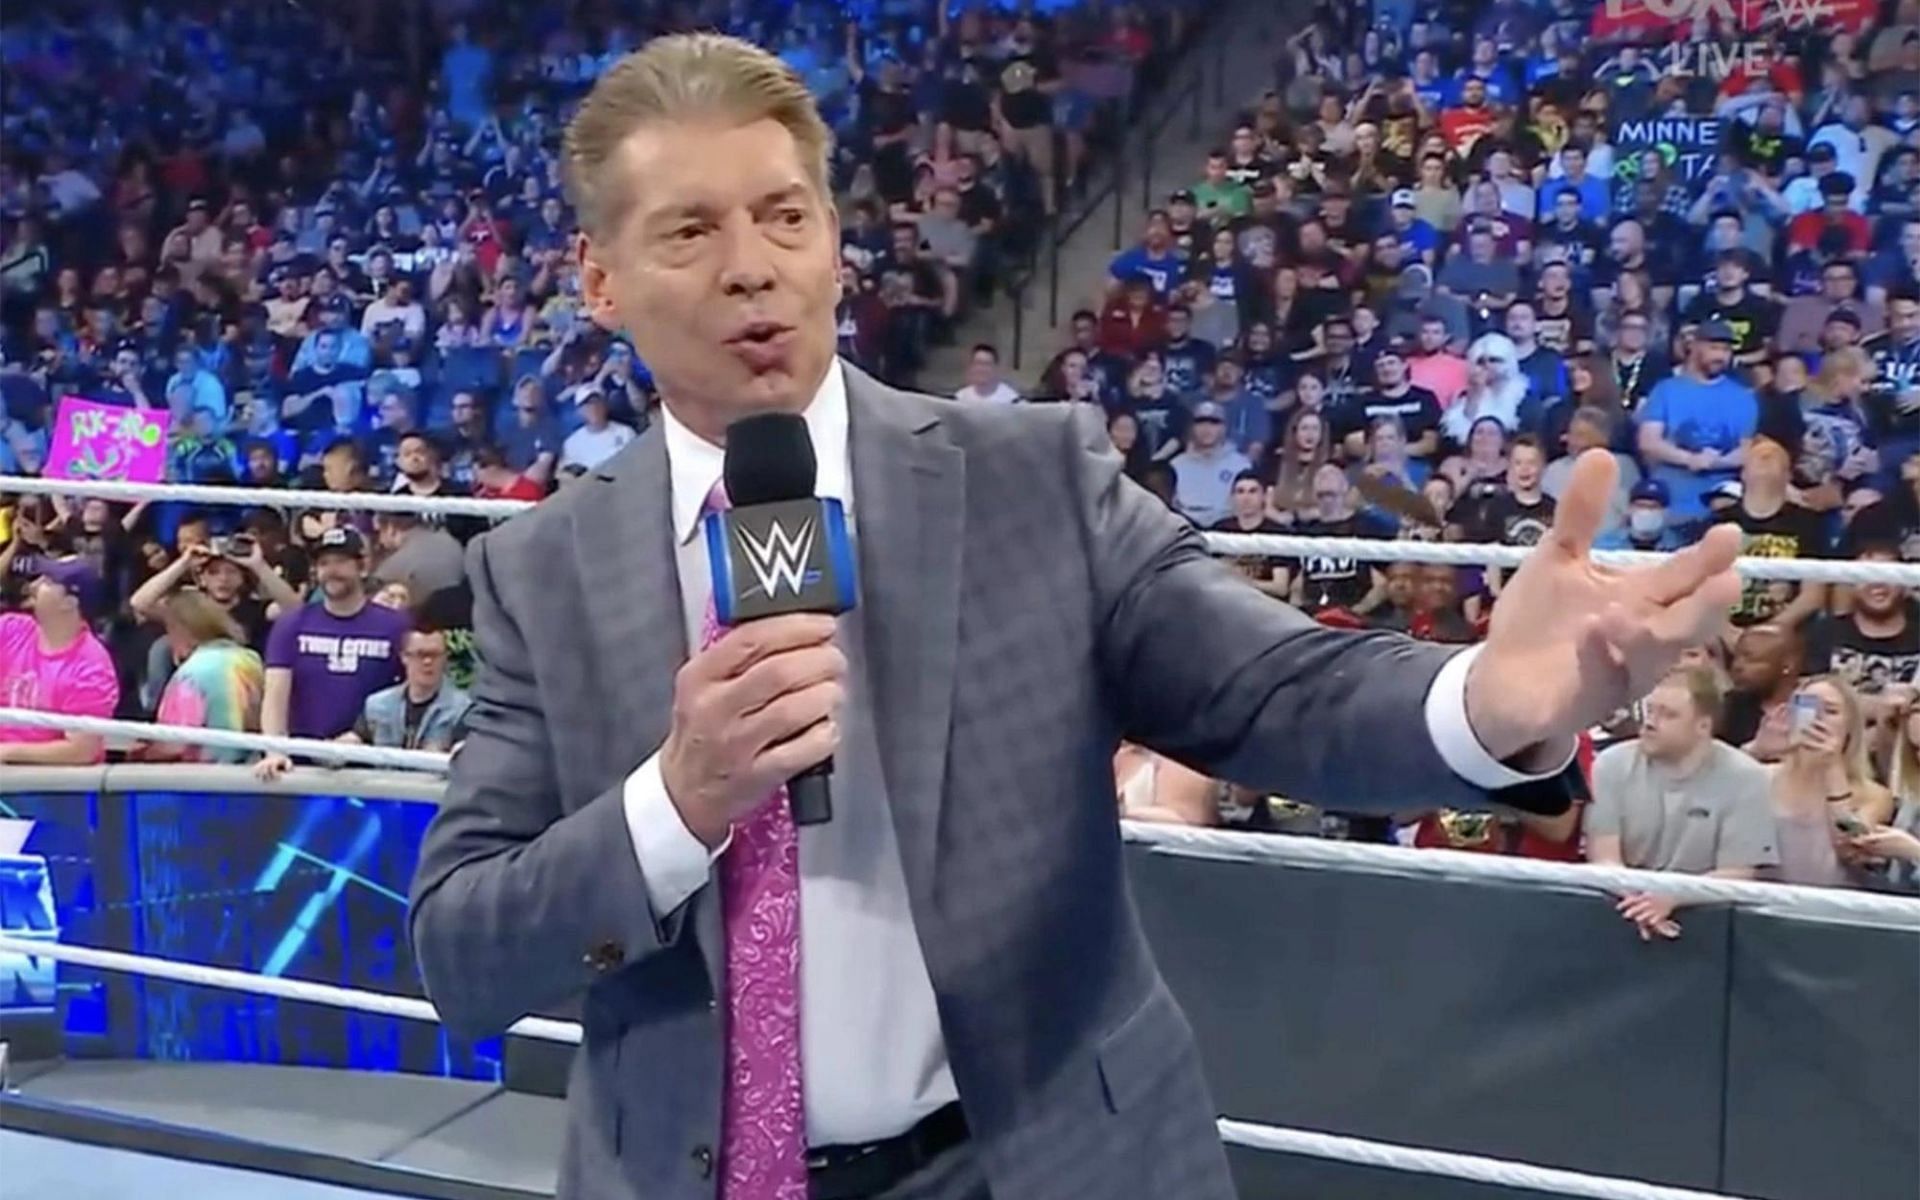 Vince McMahon appeared on RAW and SmackDown in the week following the news of the investigation being made public.